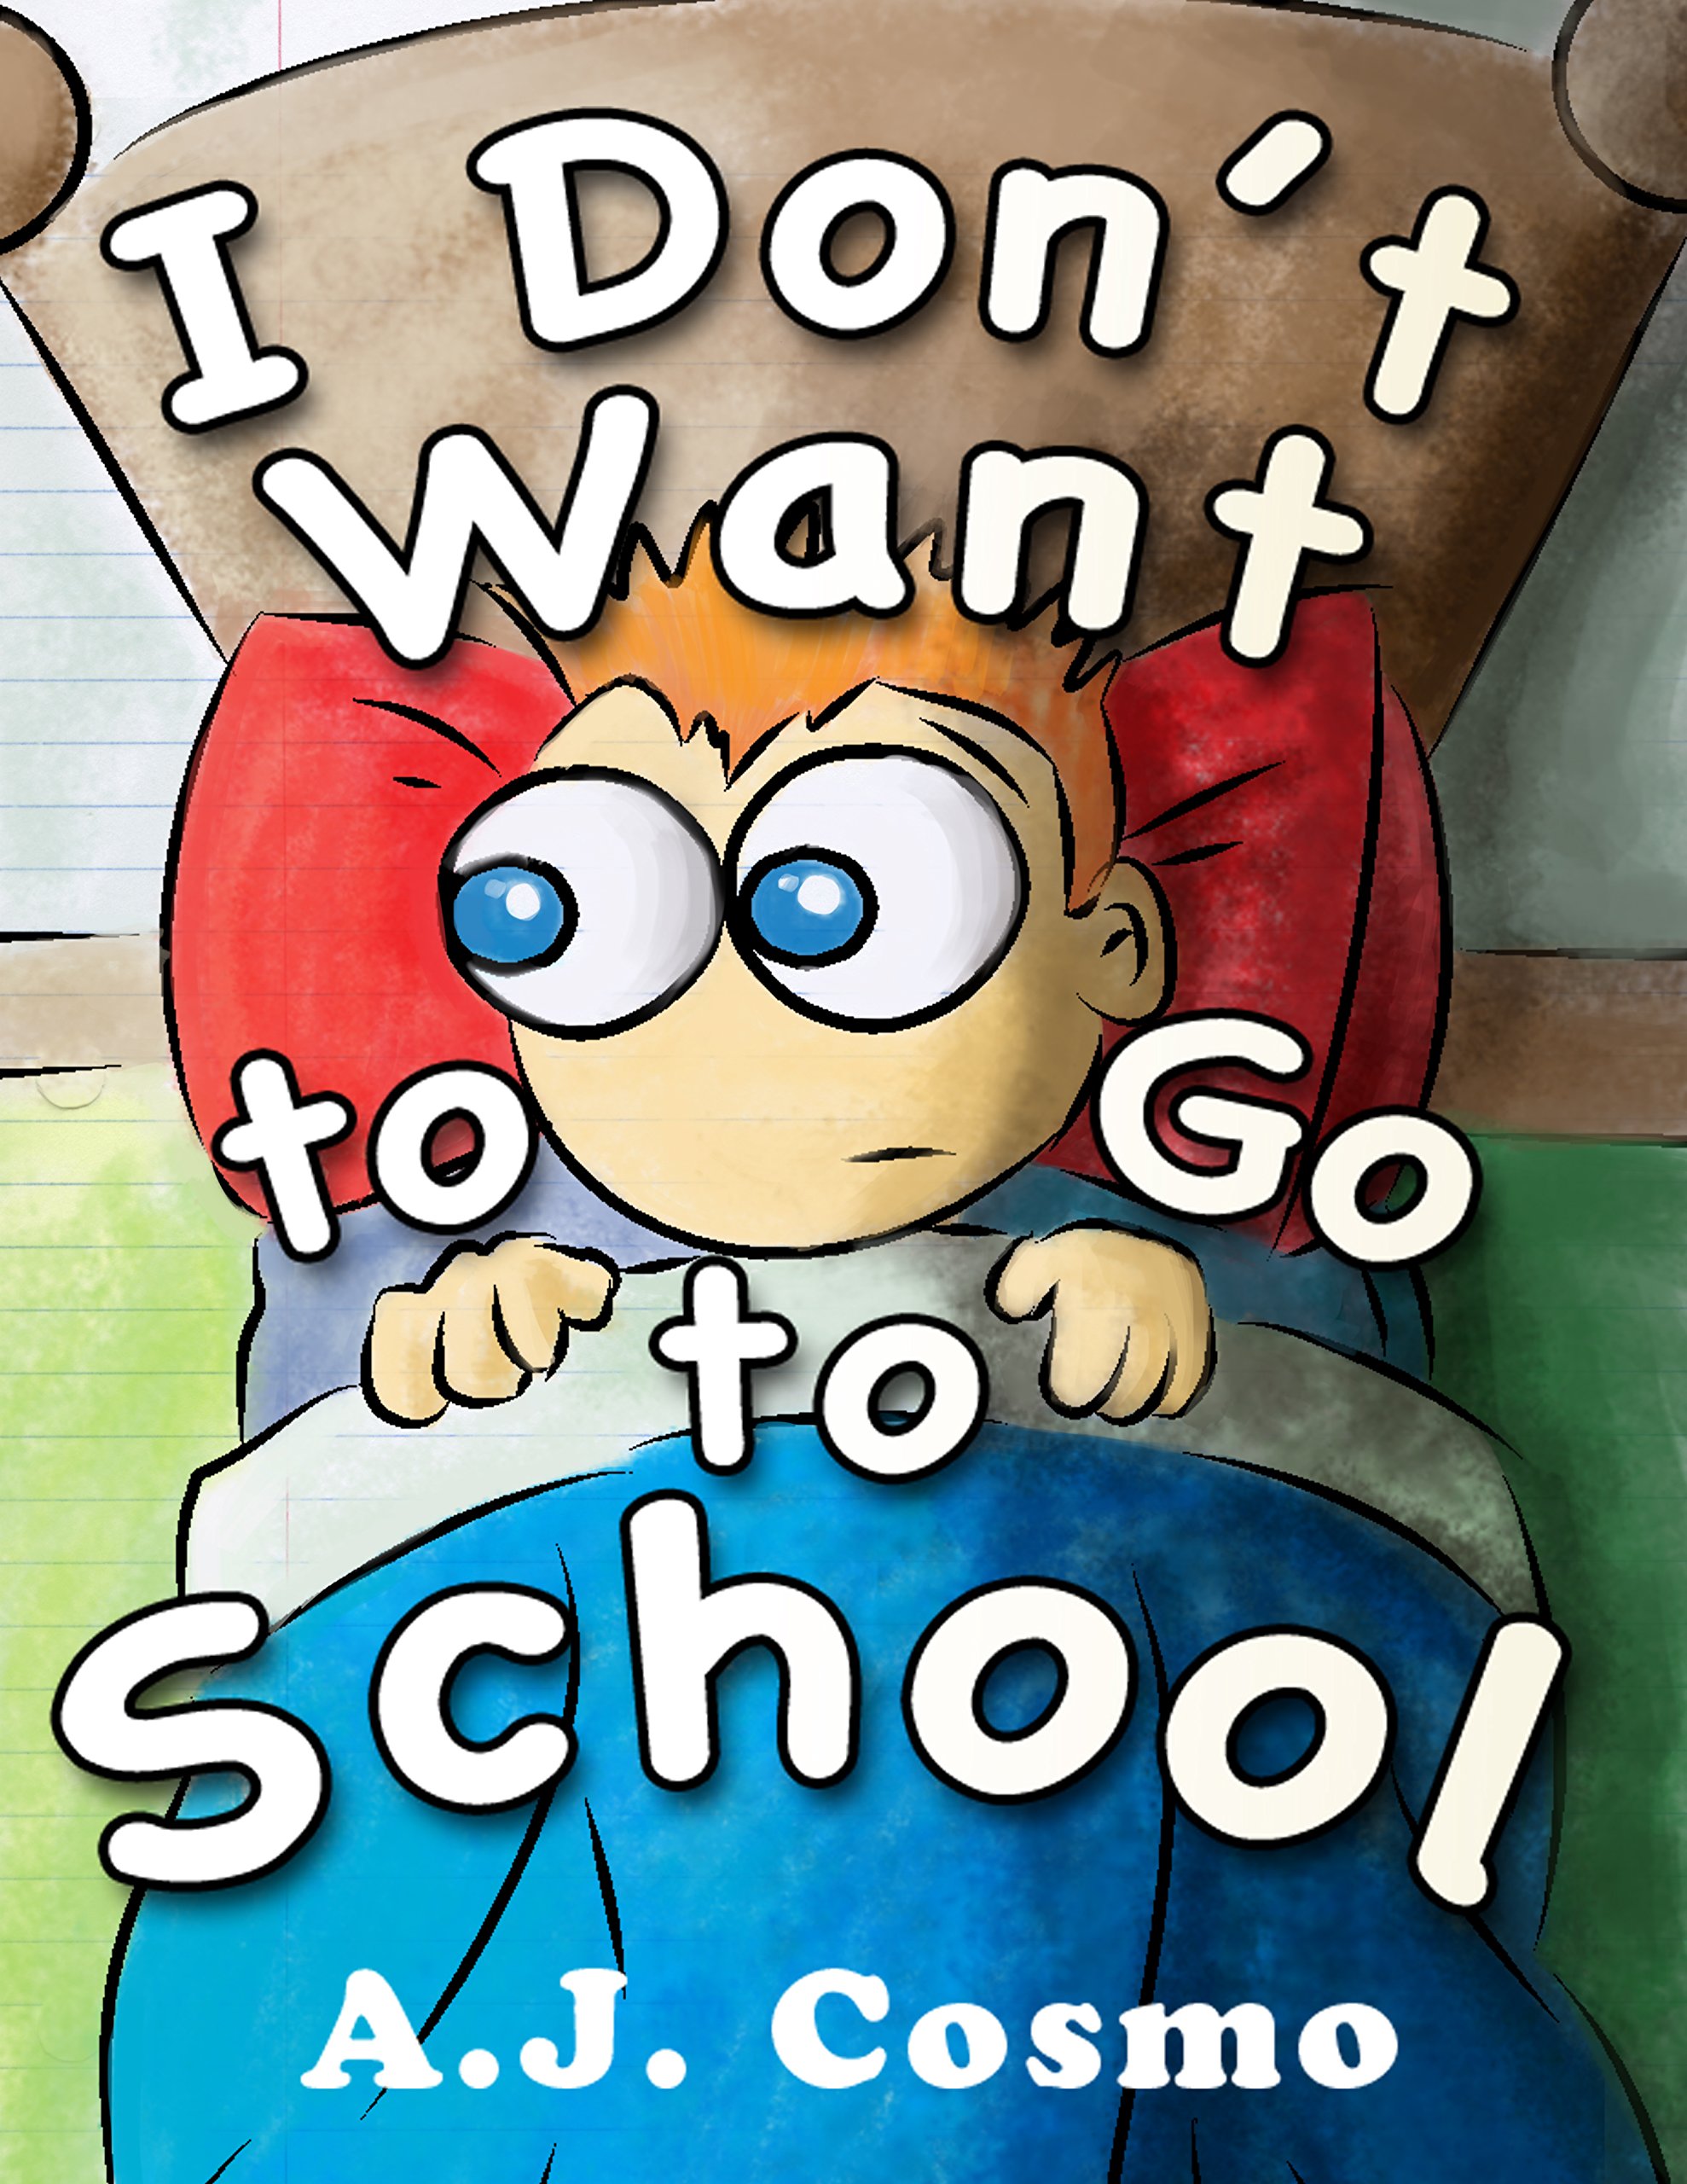 I Don't Want to Go to School